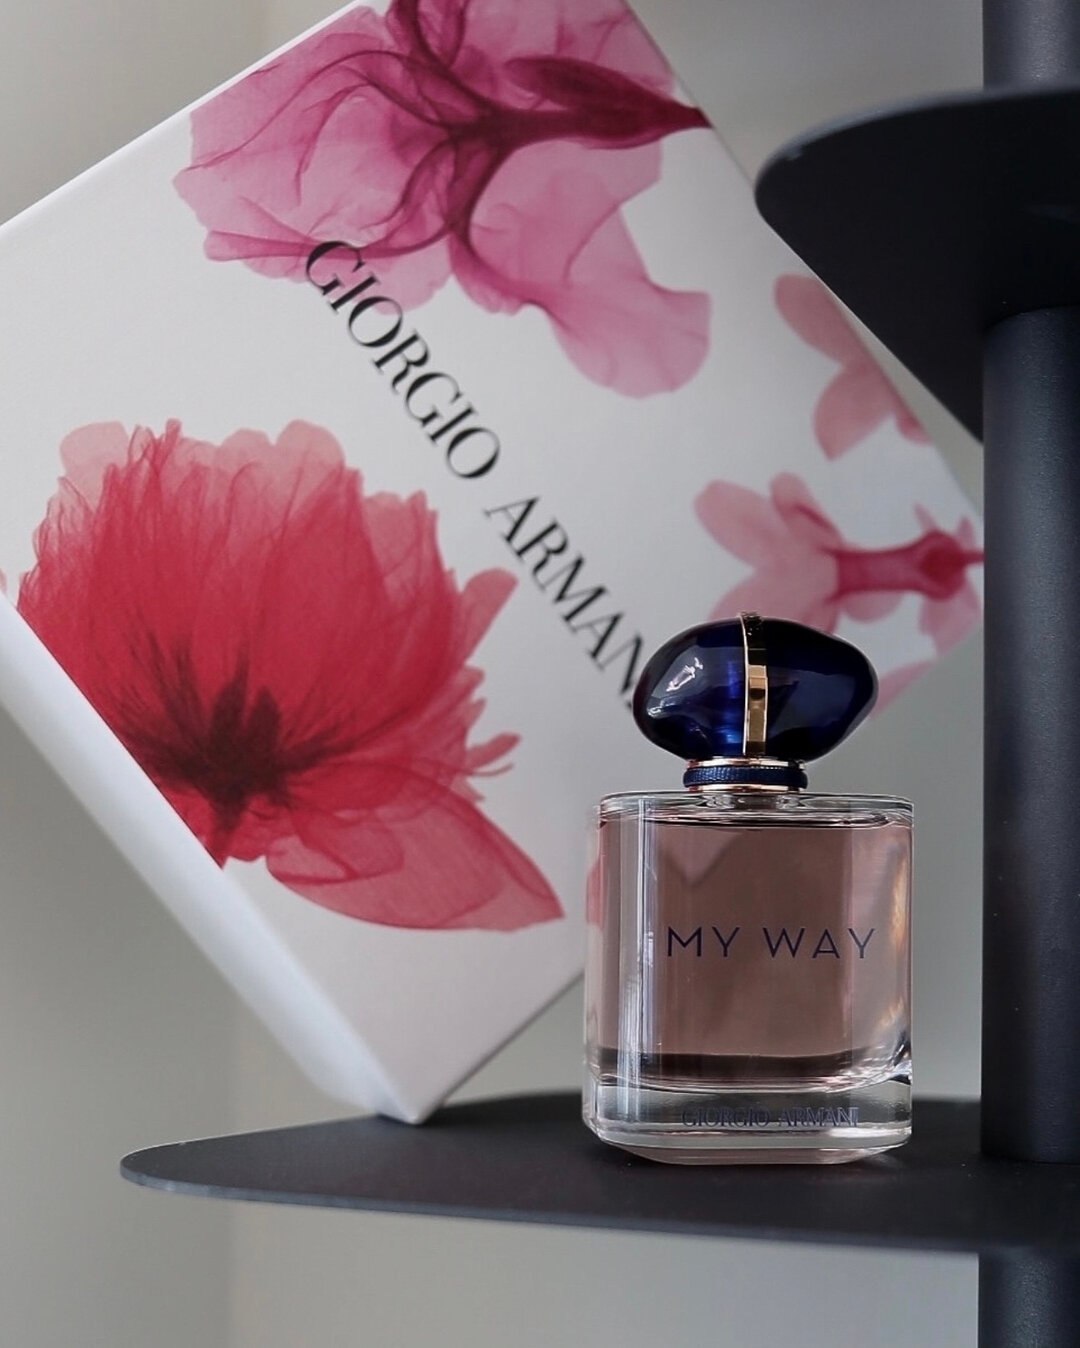 I recently discovered Armani My Way Eau de Parfum, and it completely blew me away! This luxurious and captivating fragrance is perfect for women who want to express their individuality and celebrate their unique journey in life. It's a blend of high-